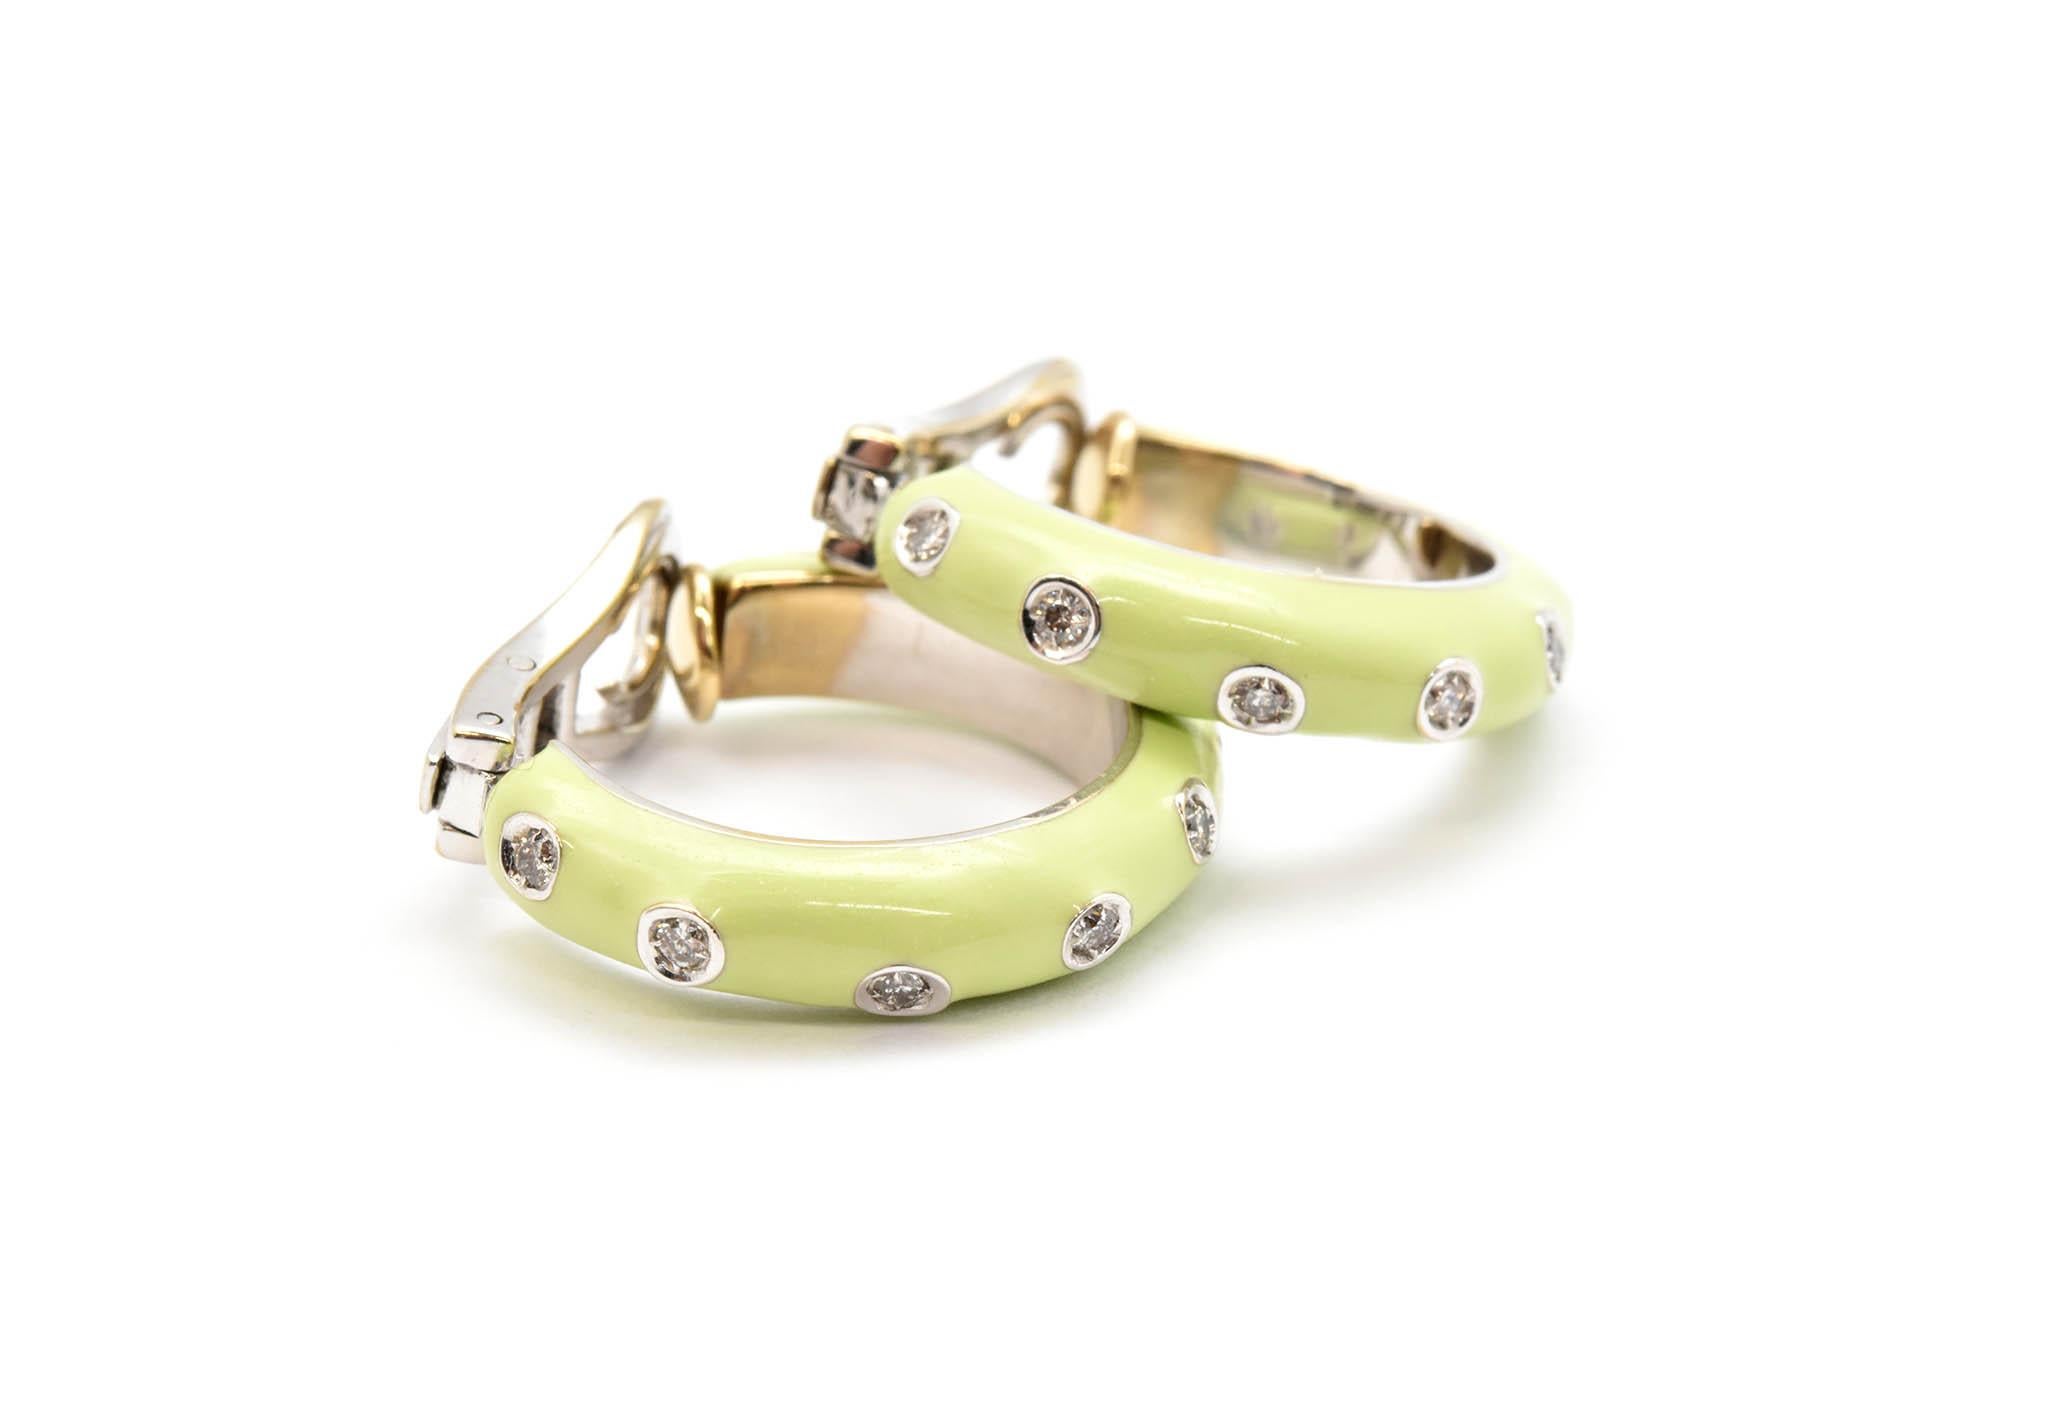 This pair of earrings is made in 18k white gold by designer Andreoli. The earrings are set with several round diamonds for a total weight of 0.36 carat. The rest of the hoops are covered in a light green enamel. The earrings measure 22mm in diameter